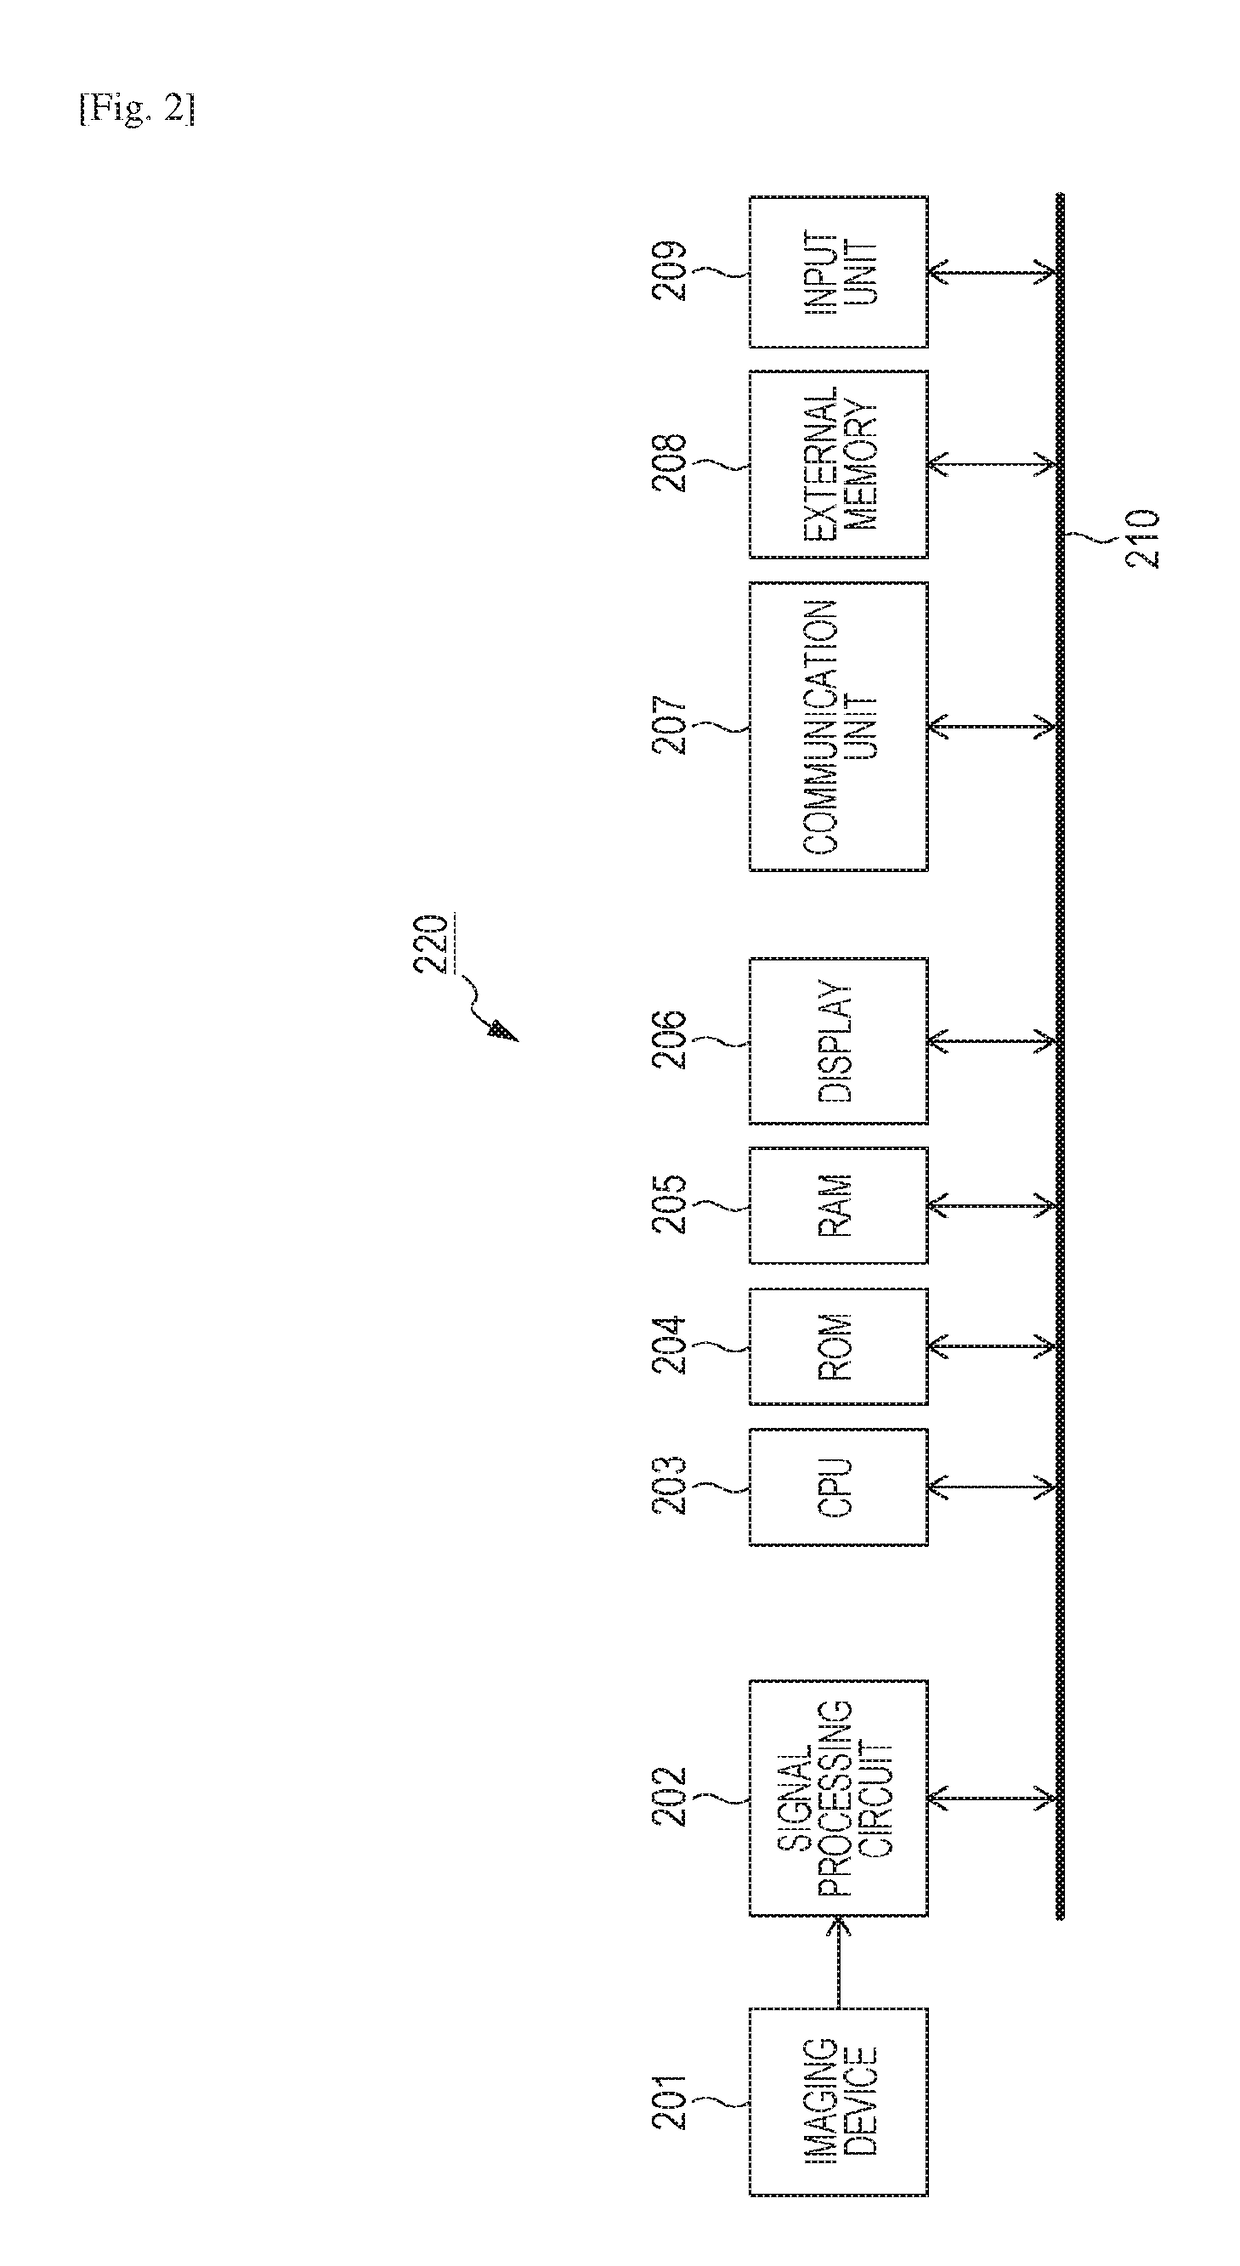 Image processing apparatus, image processing system, method for image processing, and computer program